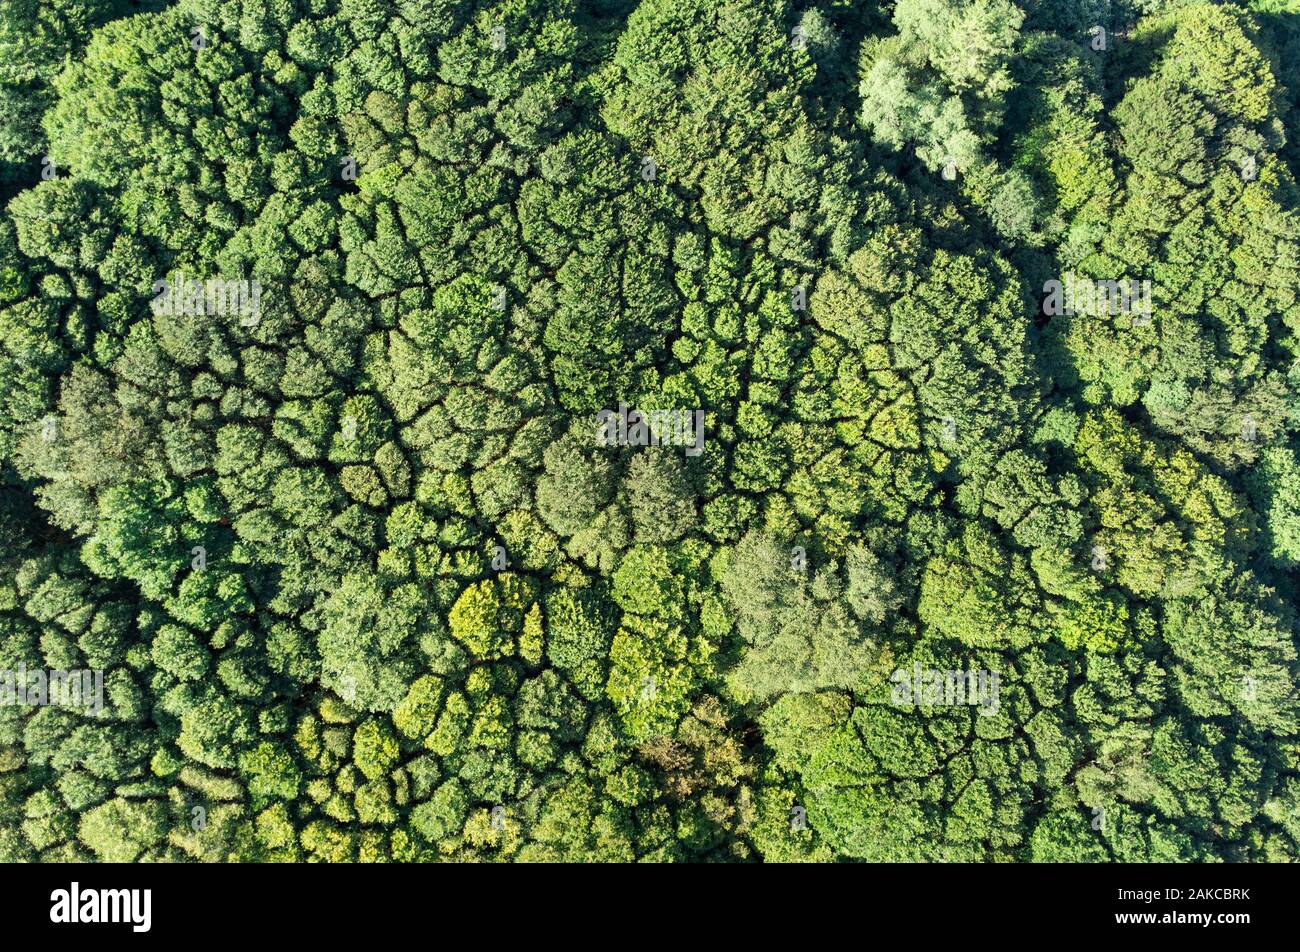 France, Puy de Dome, the Regional Natural Park of the Volcanoes of Auvergne, Chaine des Puys, Orcines, the summit of the Grand Sarcoui volcano, forest of Grand-Sarcoui, the Crown shyness, the canopy shyness, phenomenon of allelopathy (aerial view) Stock Photo